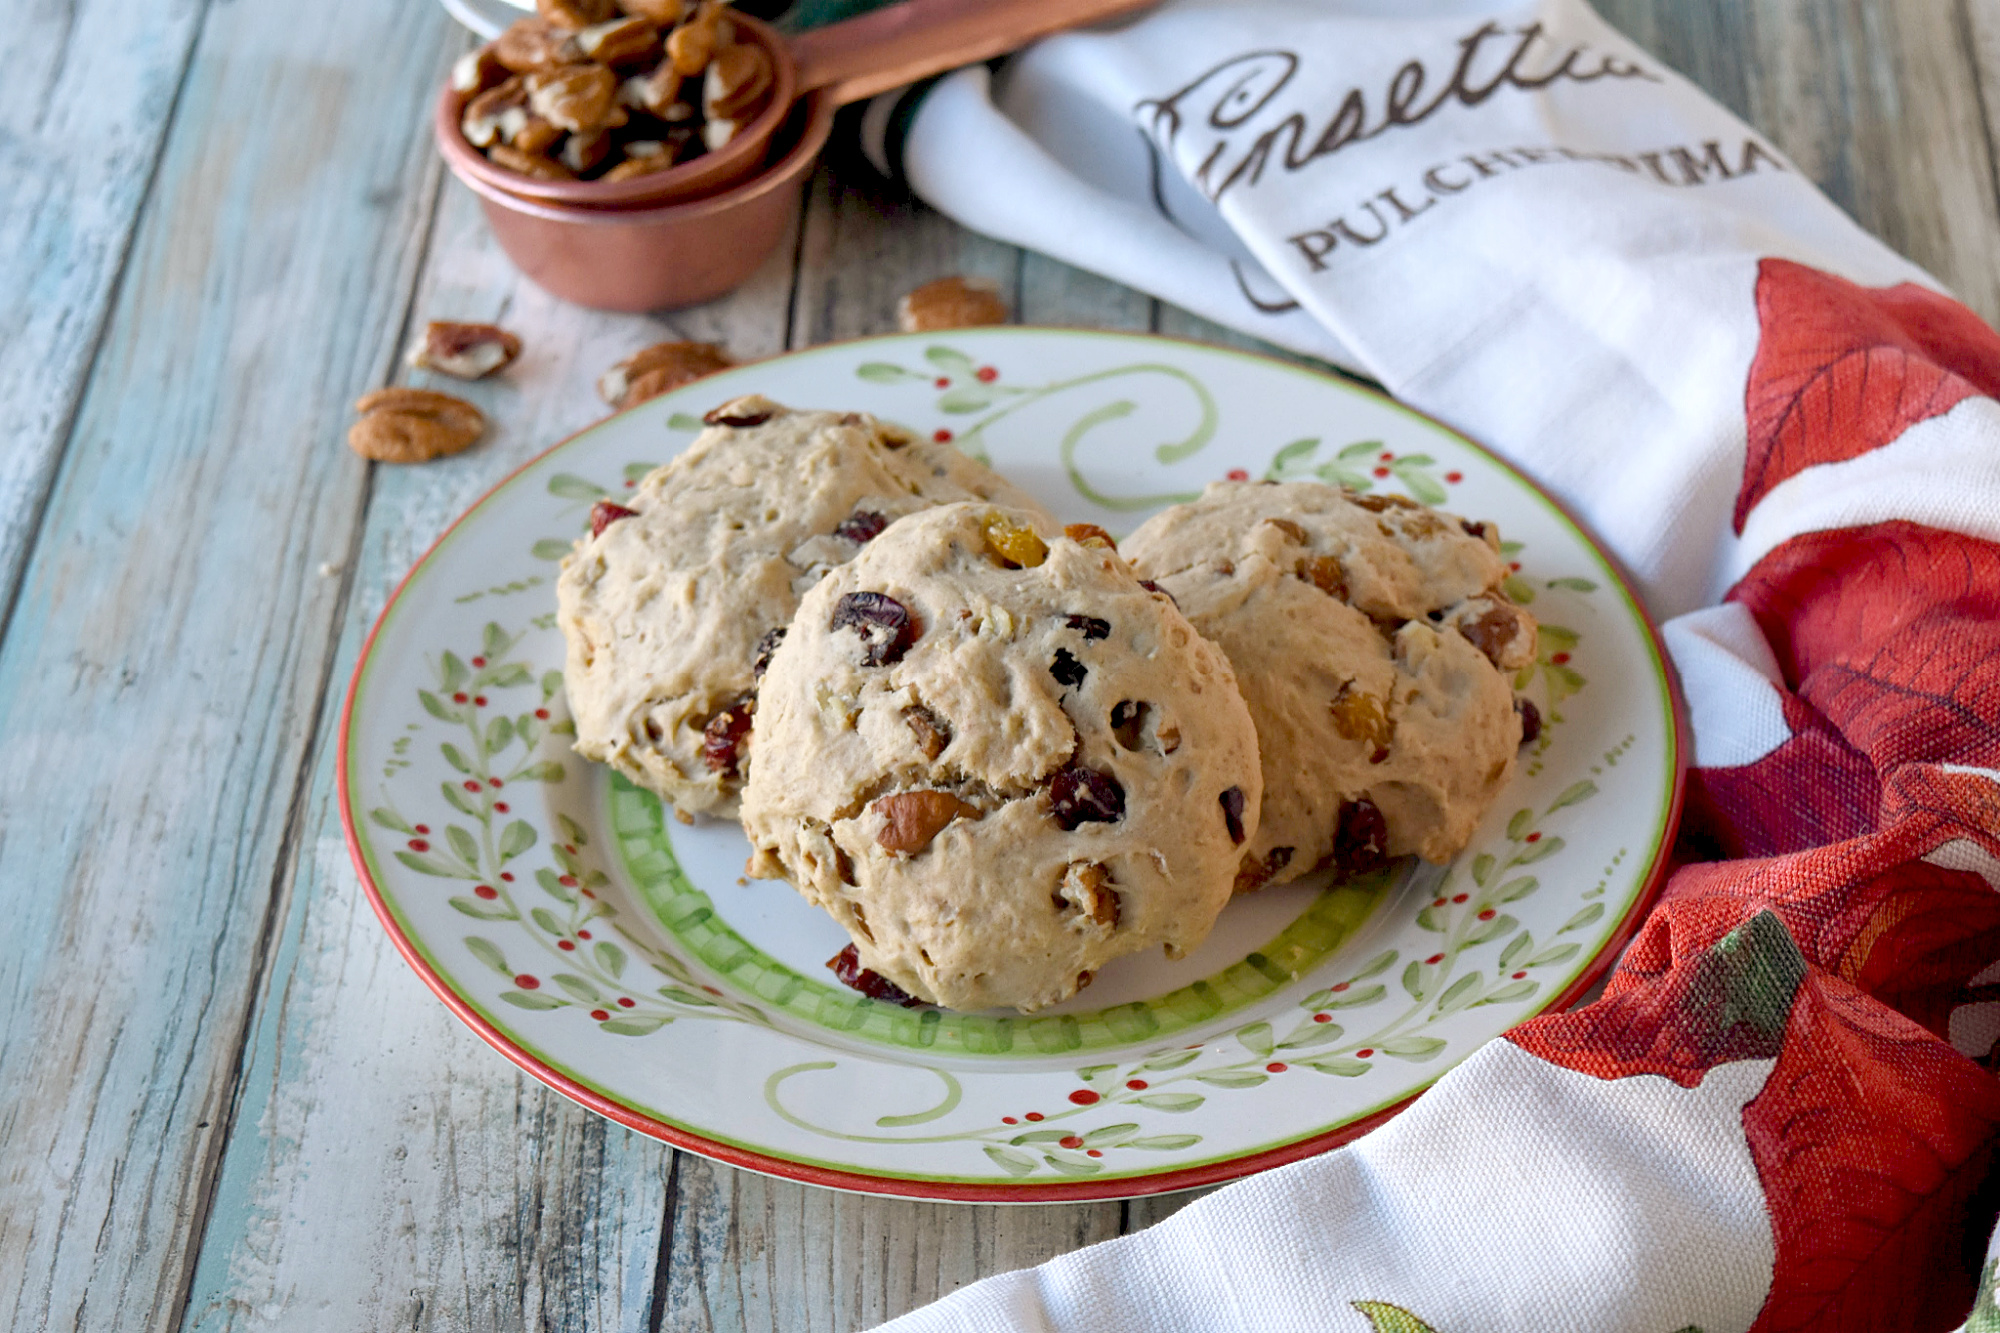 Hermit Cookies are hearty, packed with dried fruits and nuts, and perfect for dipping into coffee or tea.  More scone like than cookie, they’re slightly sweet with a soft, bread like texture.  And perfectly delicious! #ChristmasCookies